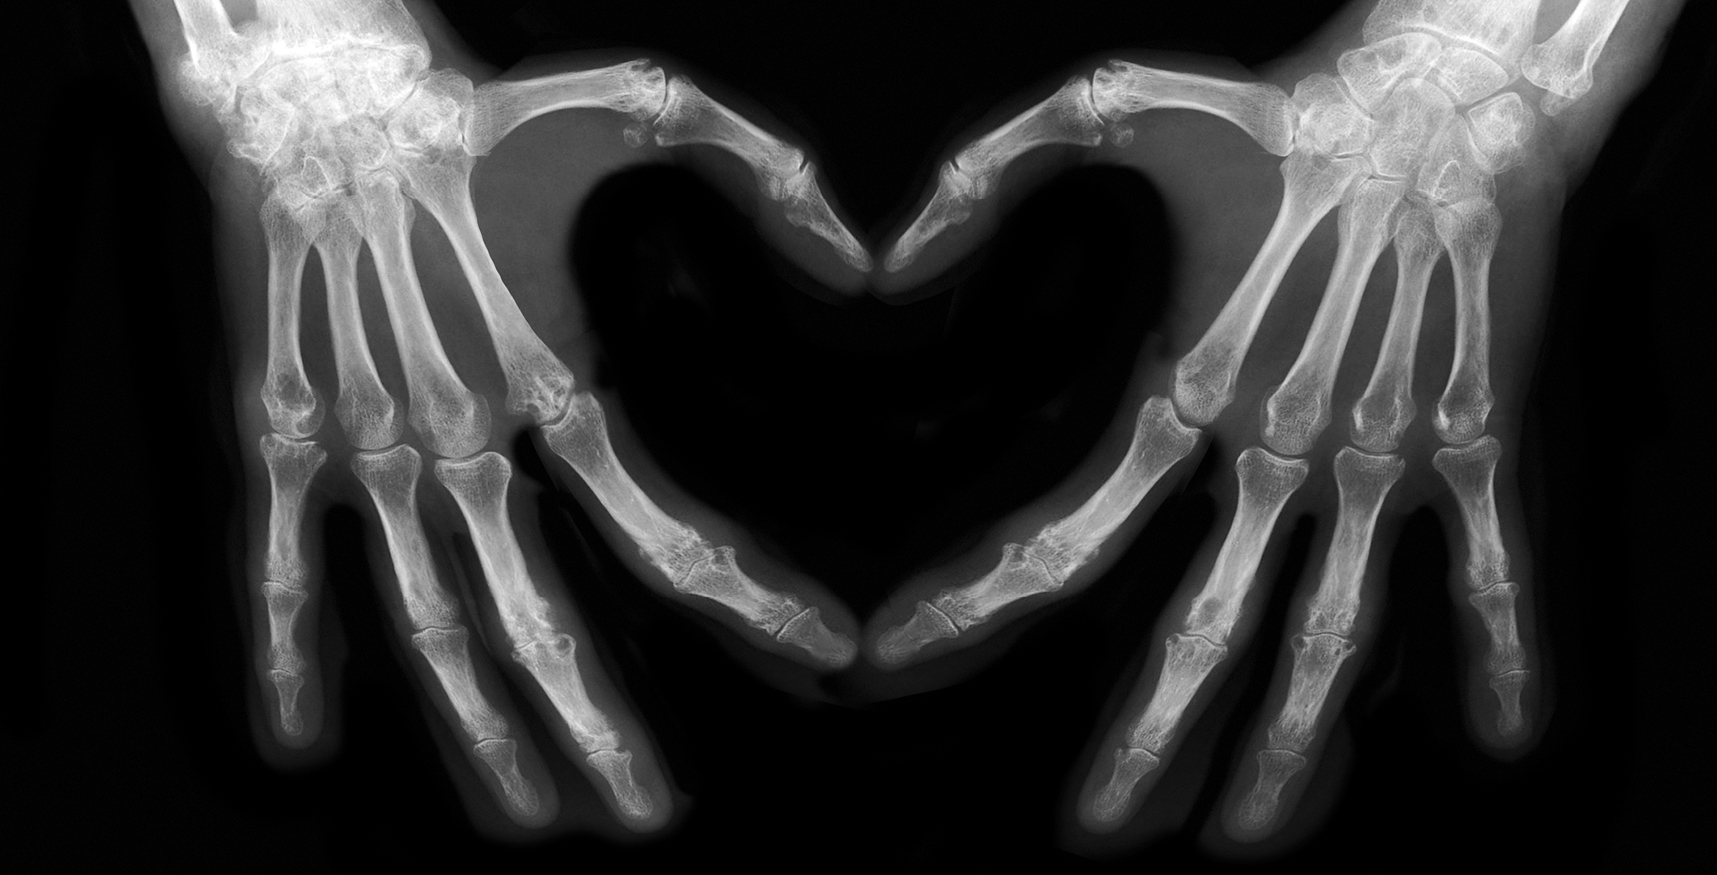 x-ray image of two hands making the shape of a heart.